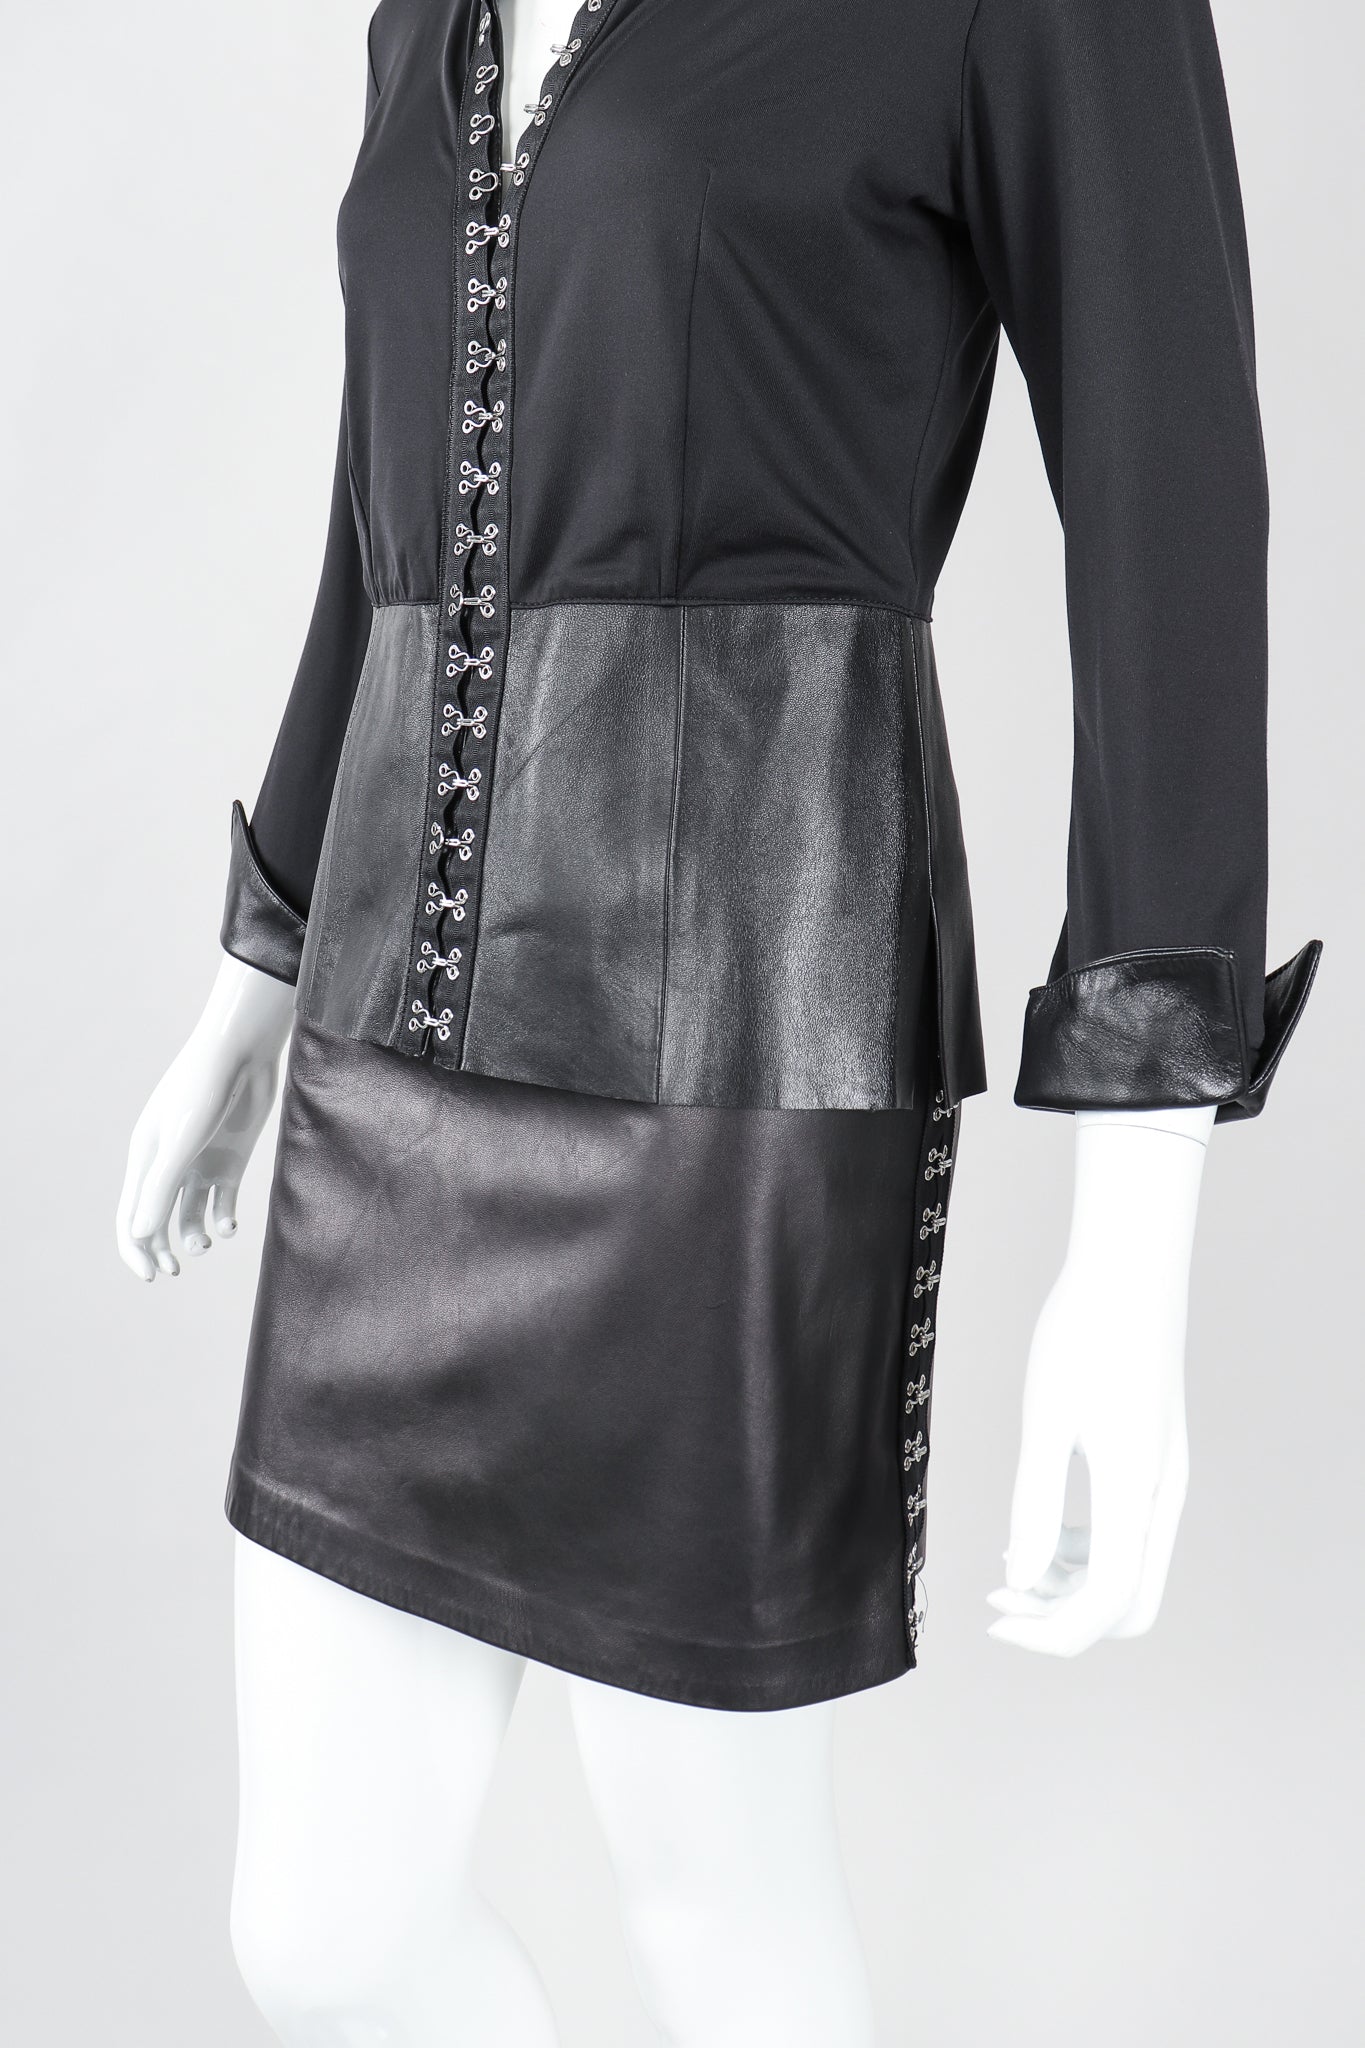 Recess Designer Consignment Vintage Isabel Leather Hooked Top & Skirt Set Outfit Ensemble Los Angeles Resale